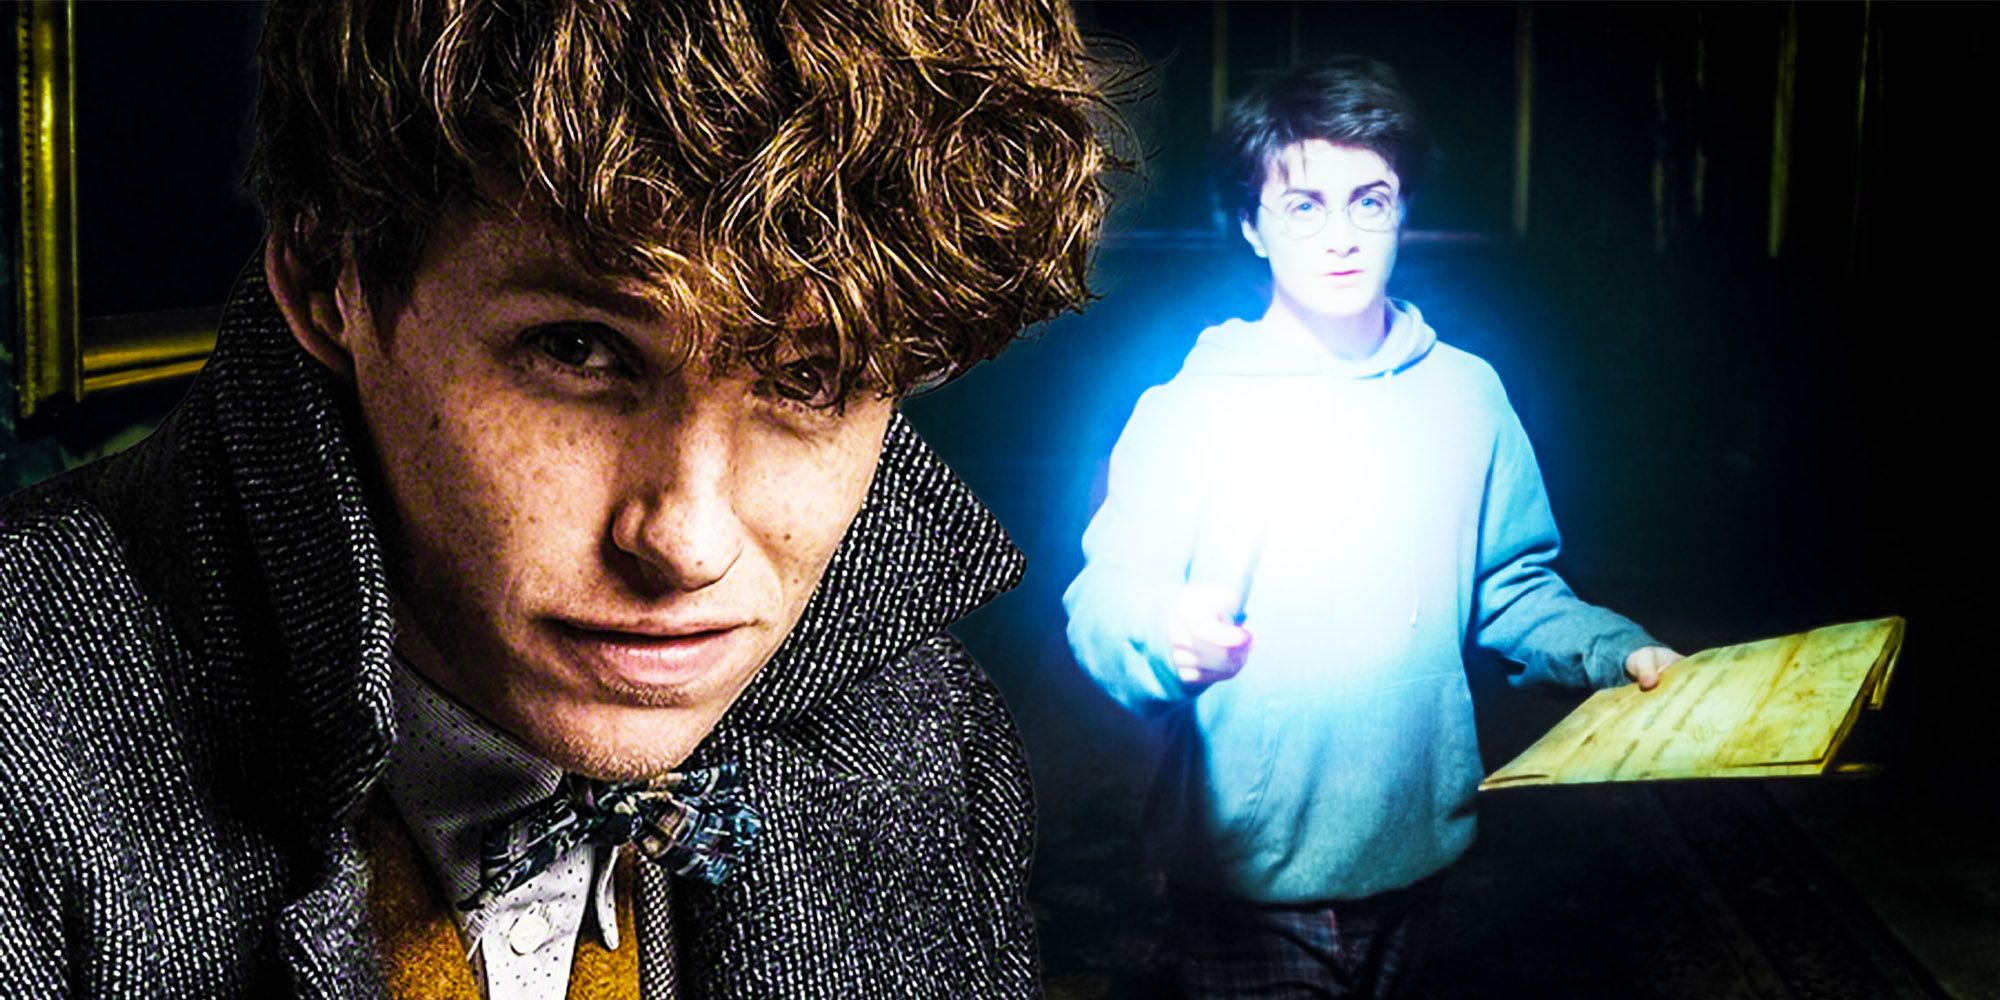 A blended image features Newt Scamander in the Fantastic Beasts movie and Harry Potter with the Marauders Map and his glowing wand in Prisoner of Azkaban